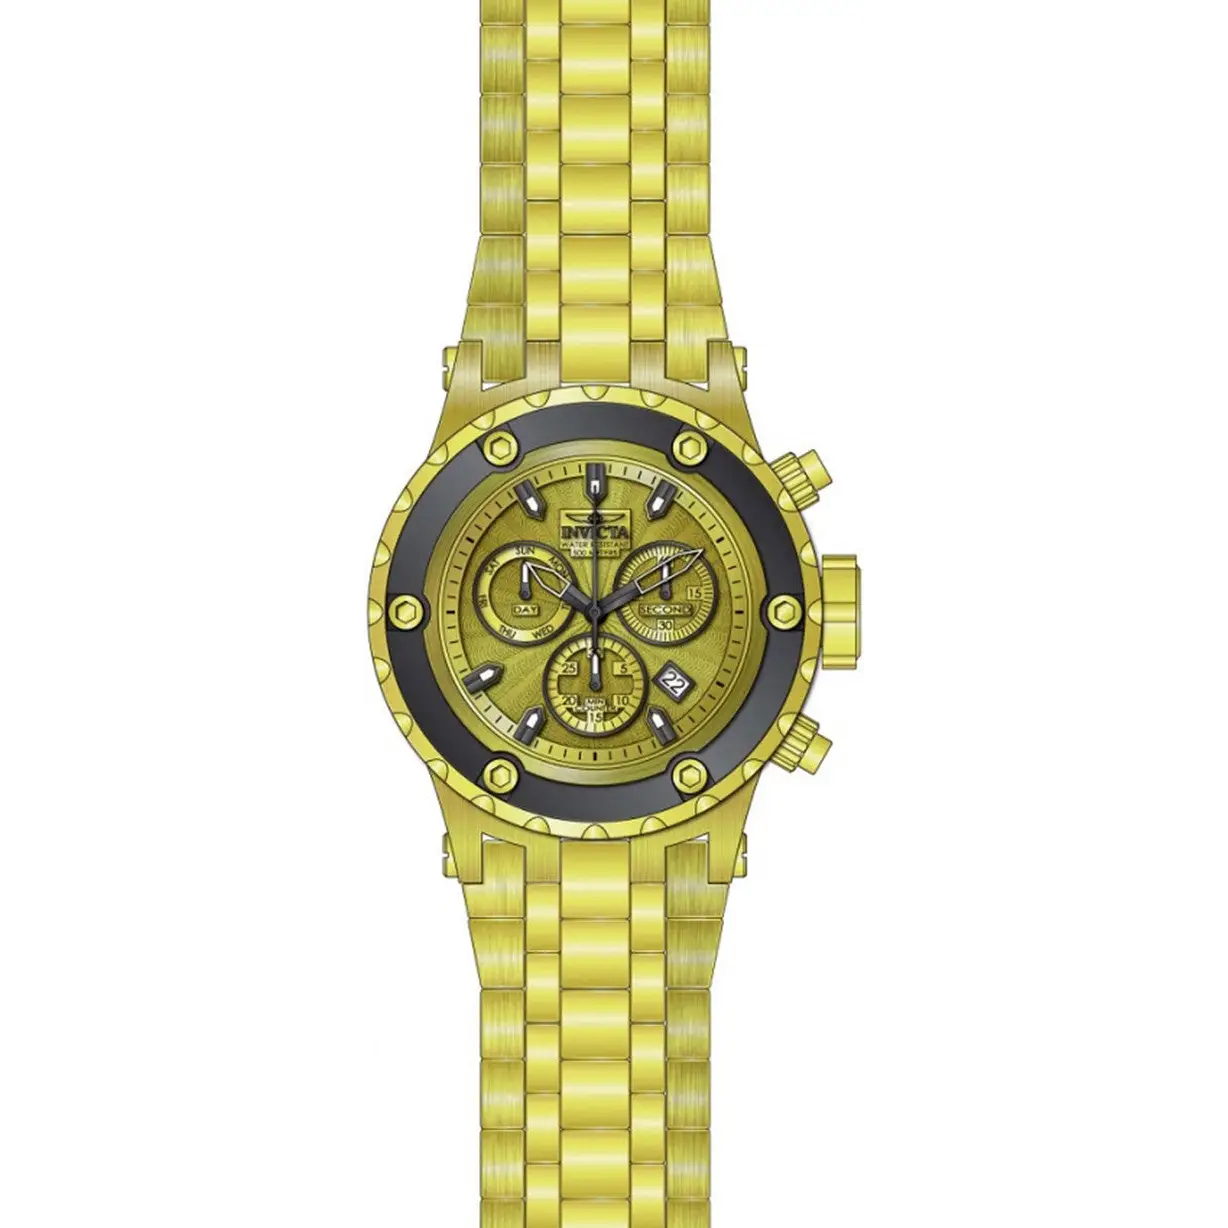 Invicta Men's Gold Tone Stainless Steel Watch